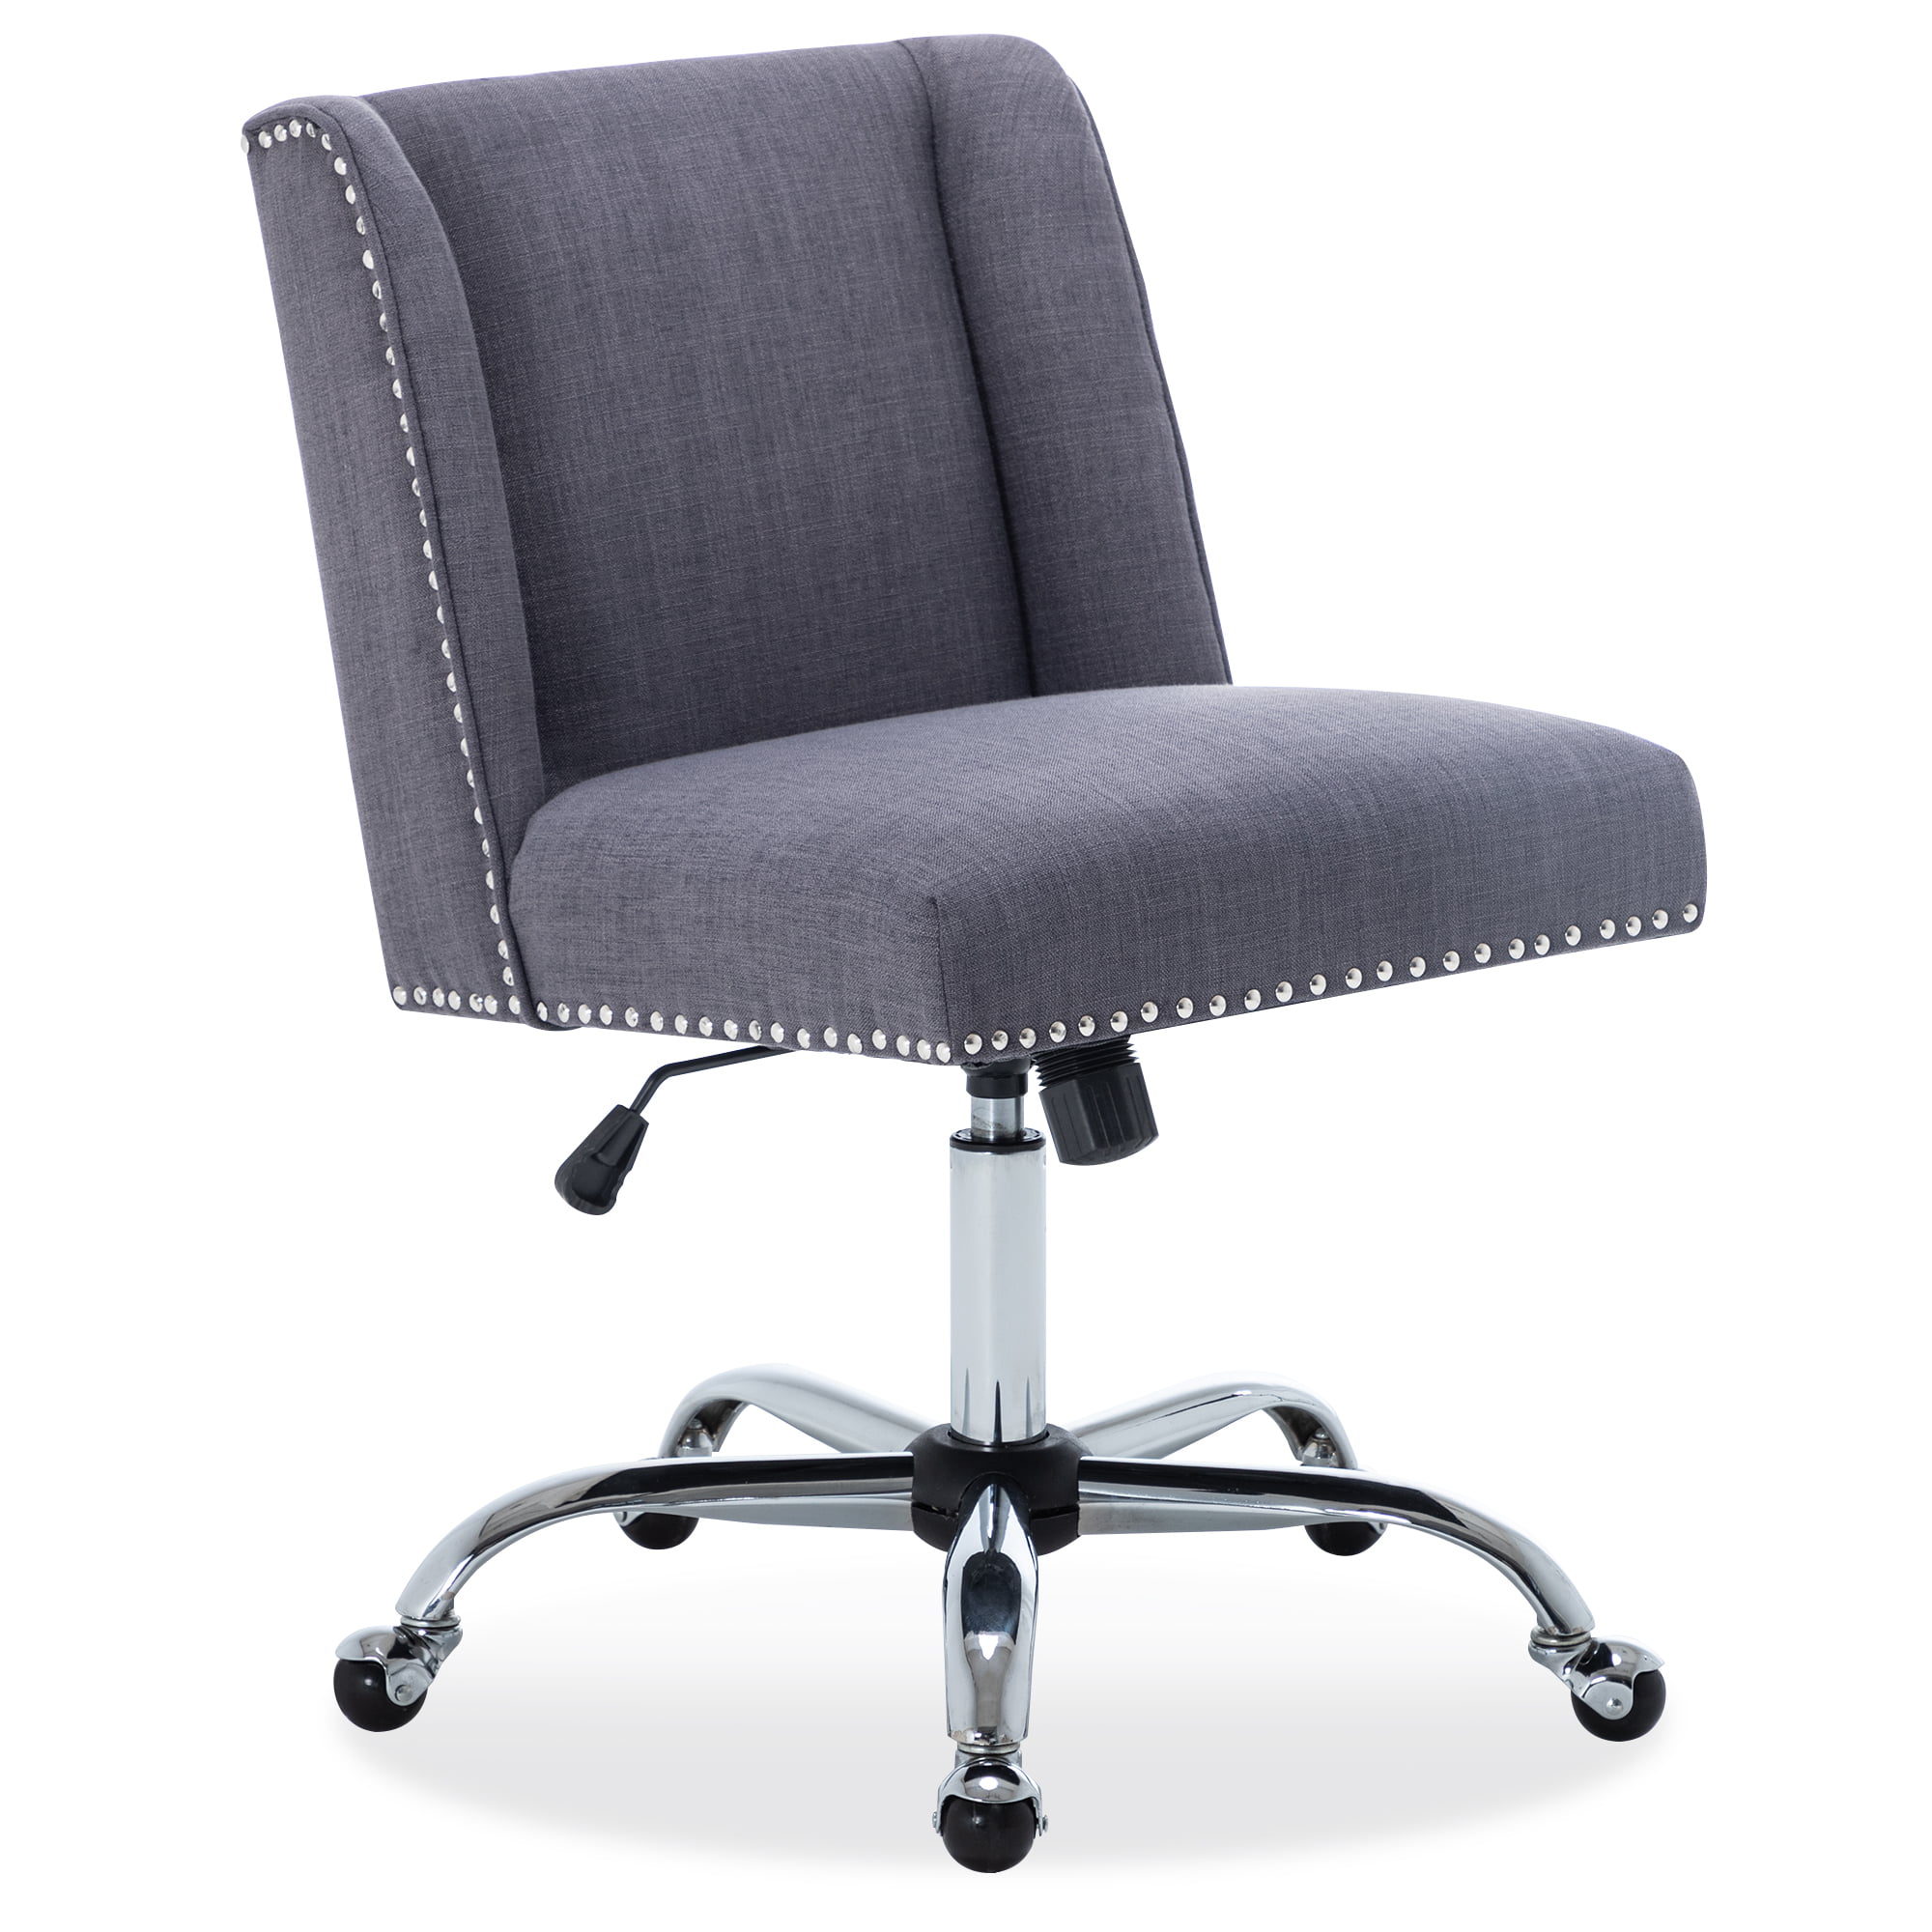 Modern Swivel Chair No Wheels Adjustable Height for Small Space